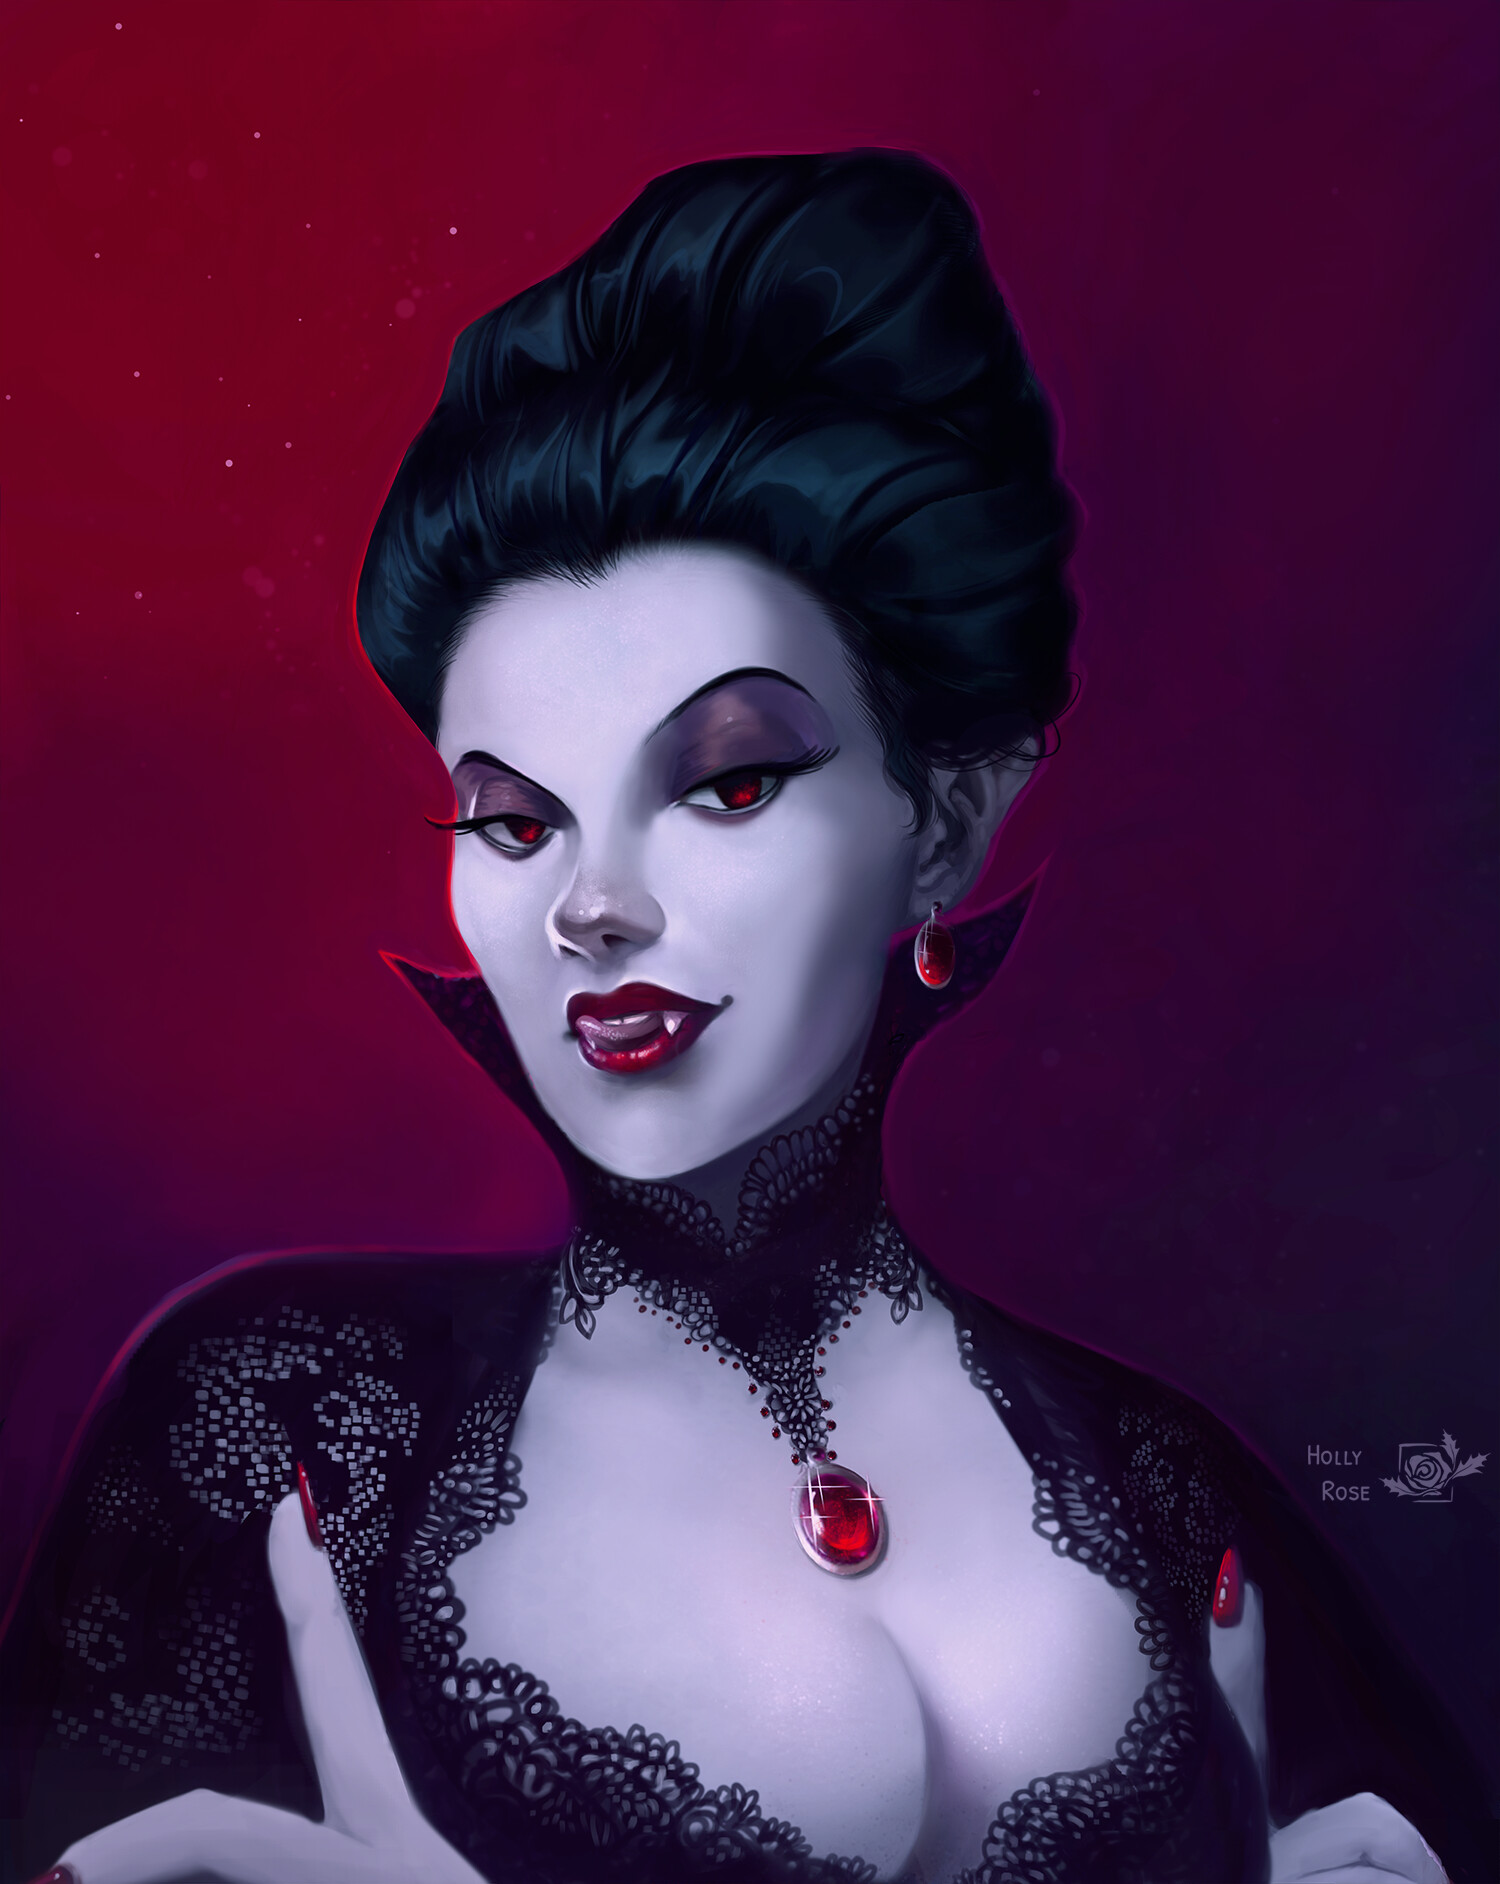 Really tried to get across a subtly sinister, sexy vampire vibe on this one...